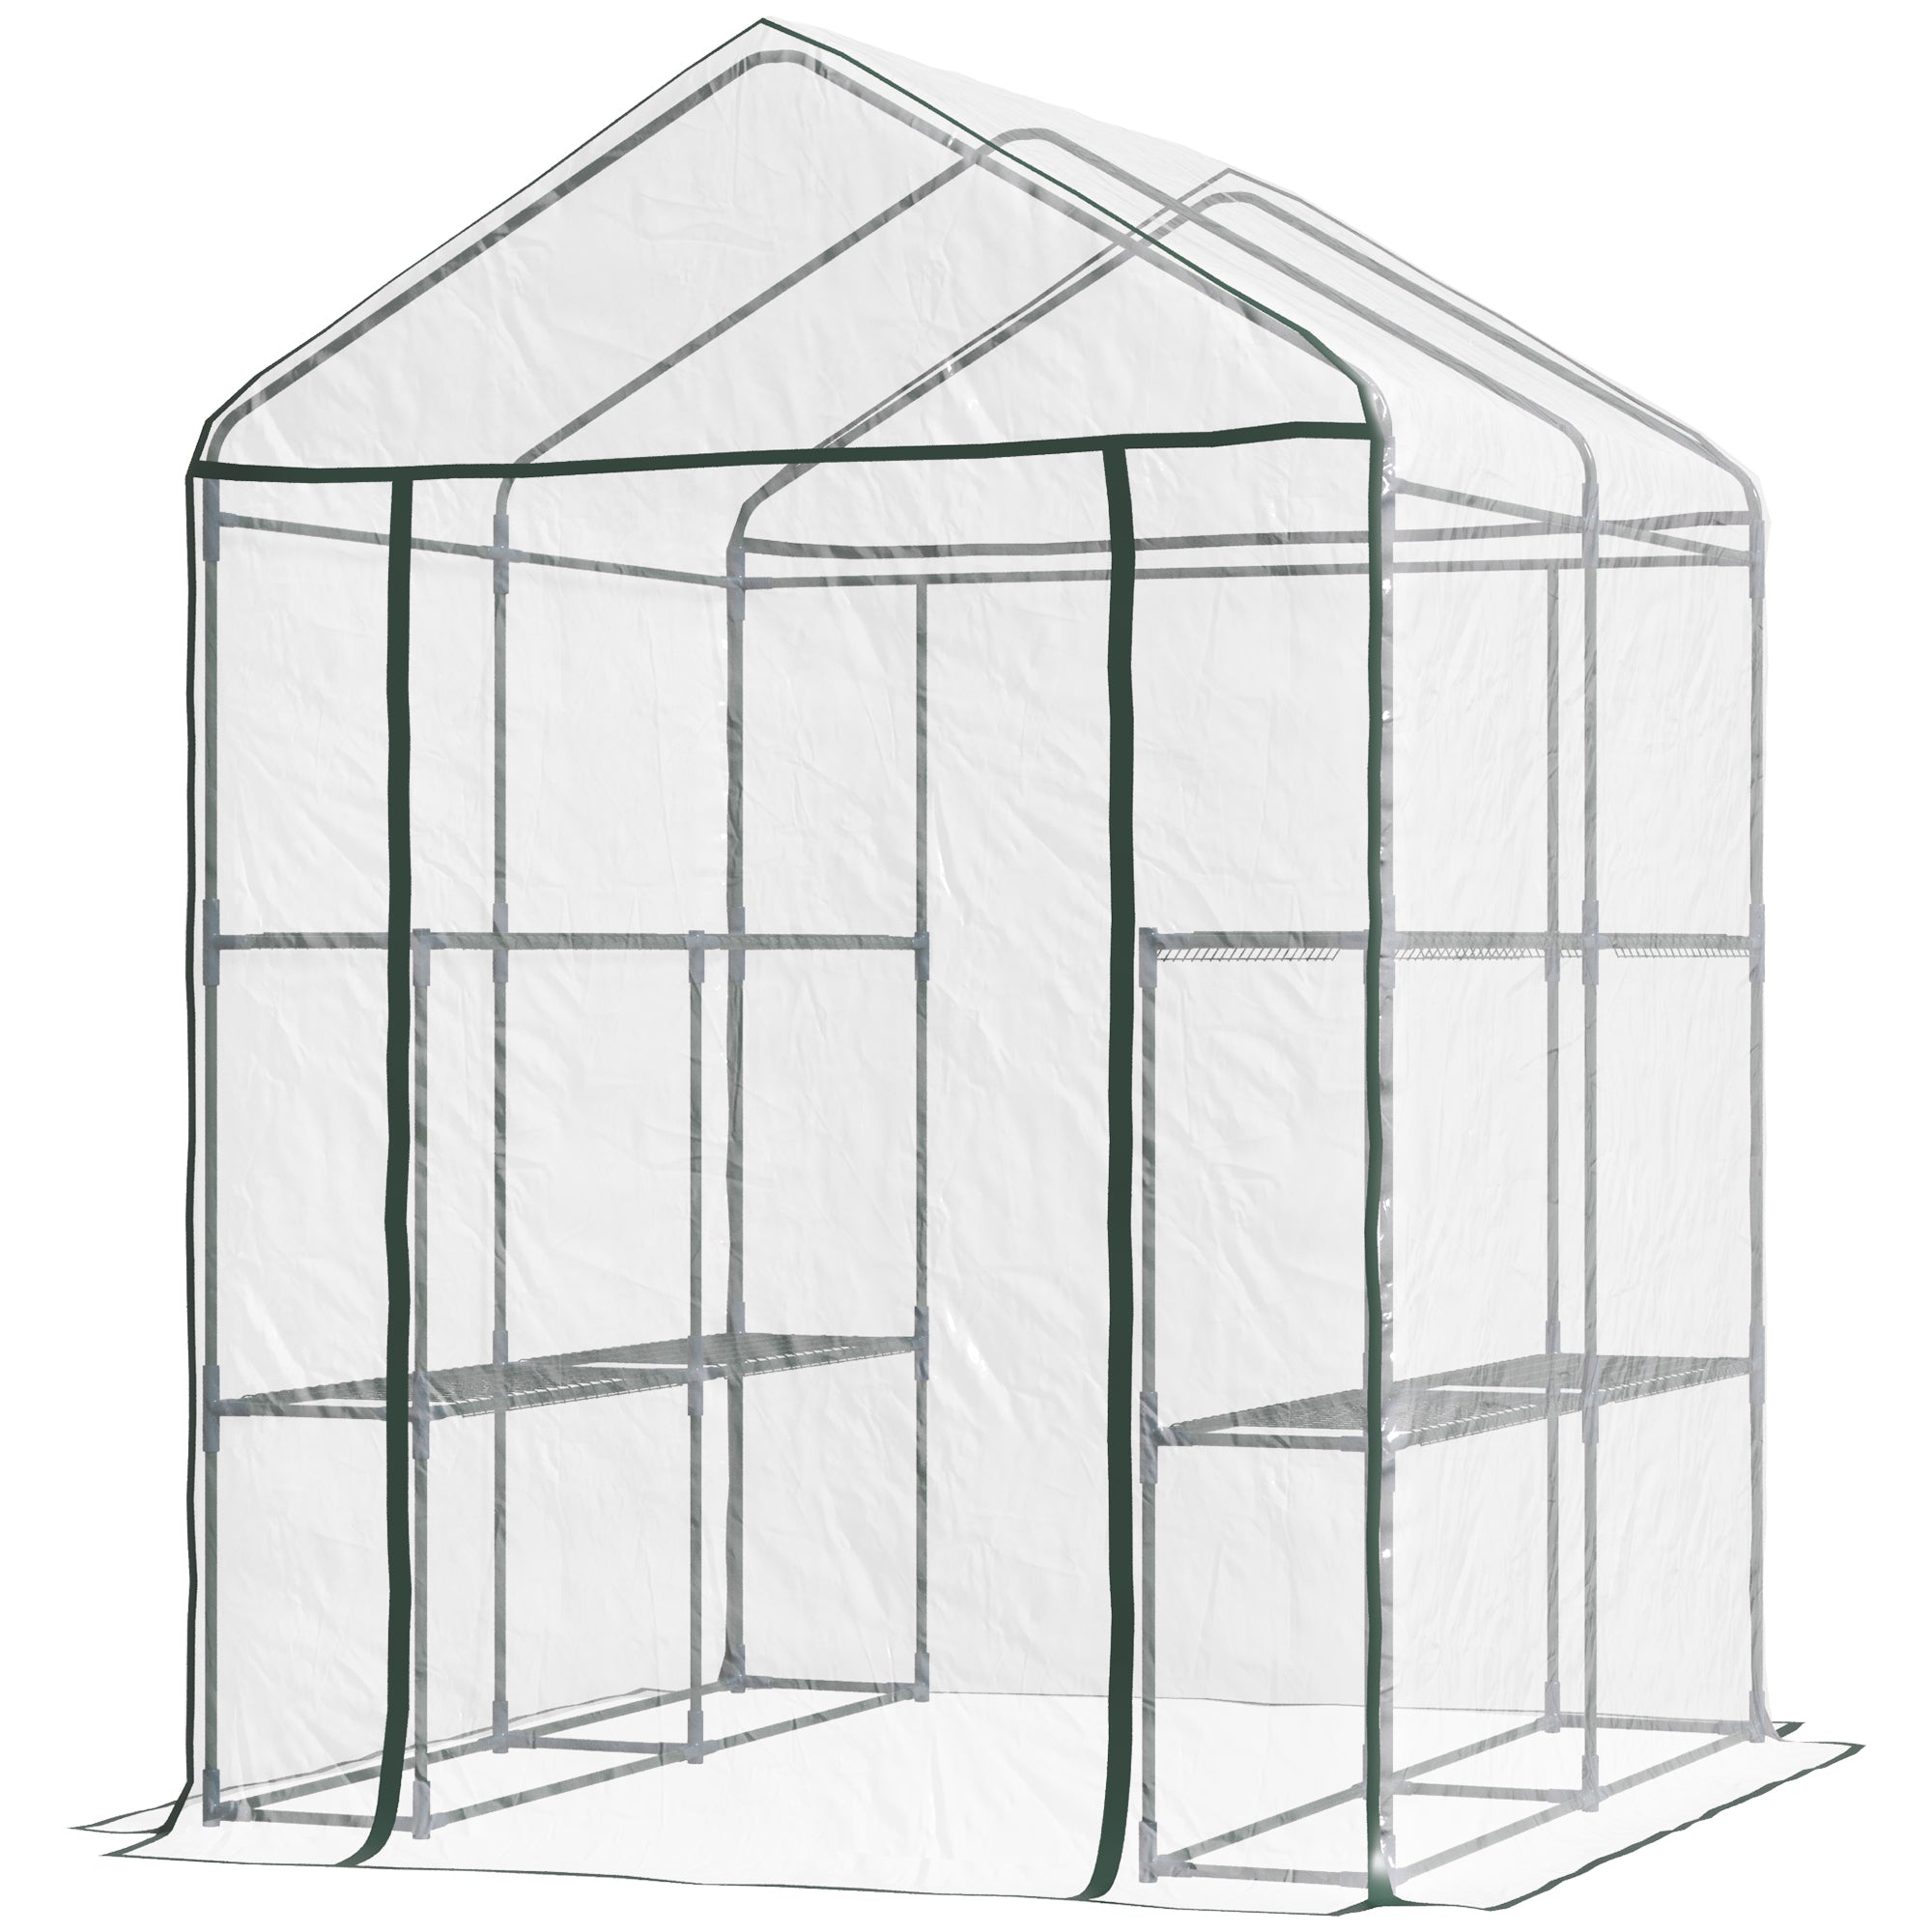 Outsunny Walk In Greenhouse Garden Clear PVC Frame Shelves Reinforced Plant Grow  | TJ Hughes